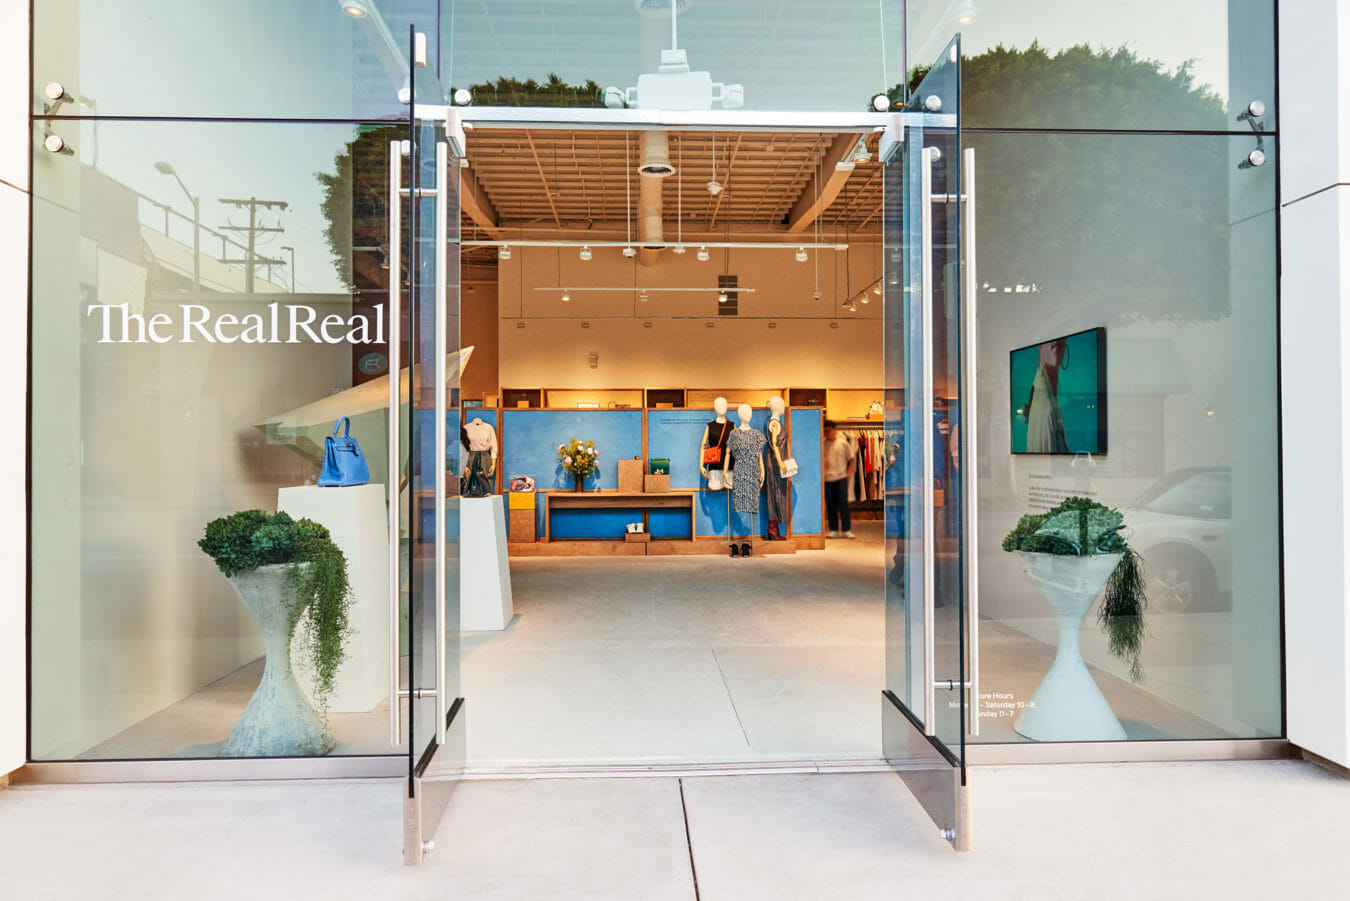 The exterior of luxury resale company The RealReal's store in Los Angeles